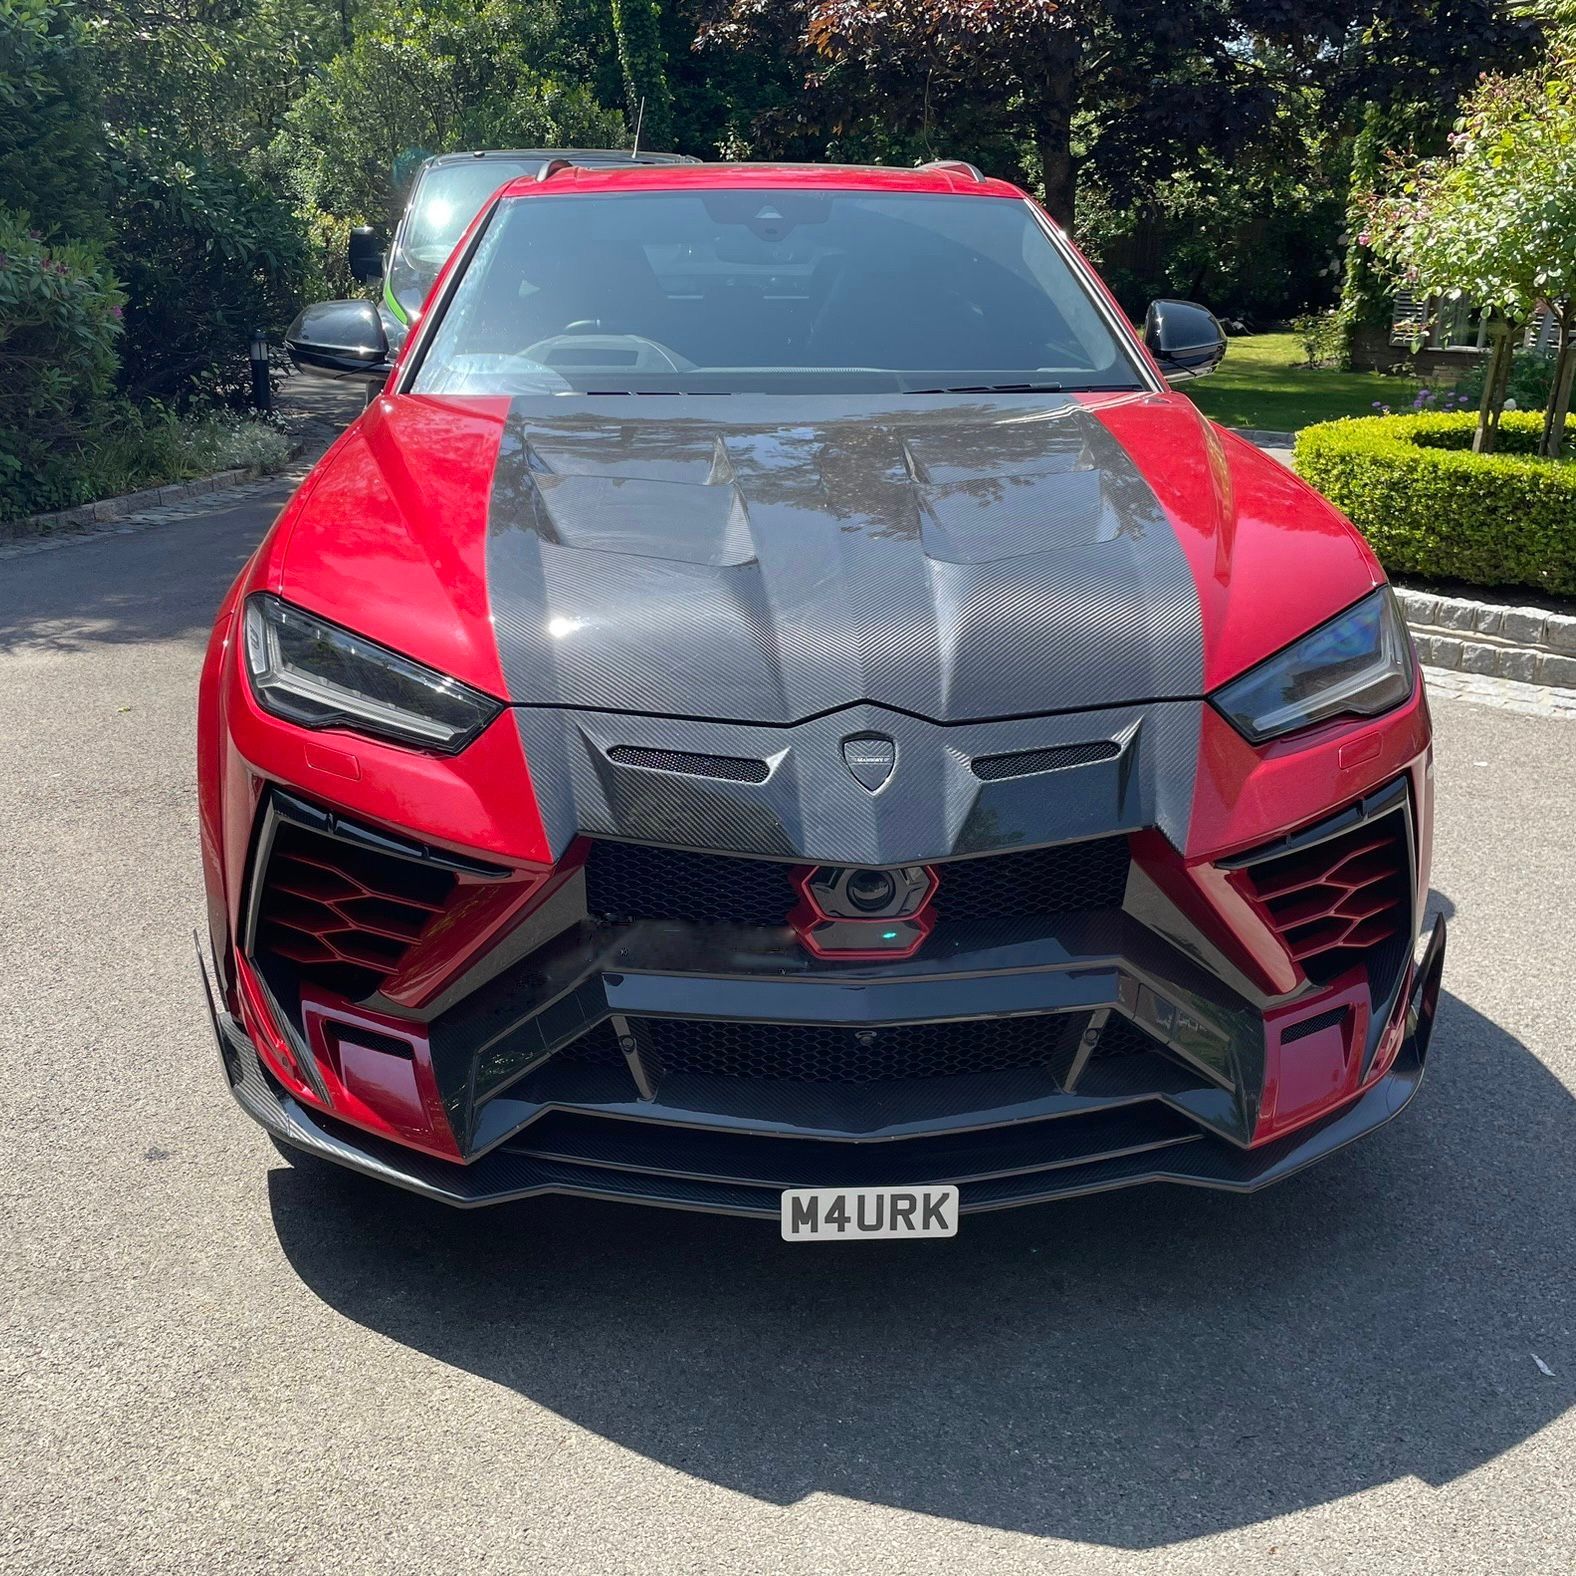 Lamborghini Urus with a Mansory Kit fitted front license plate support